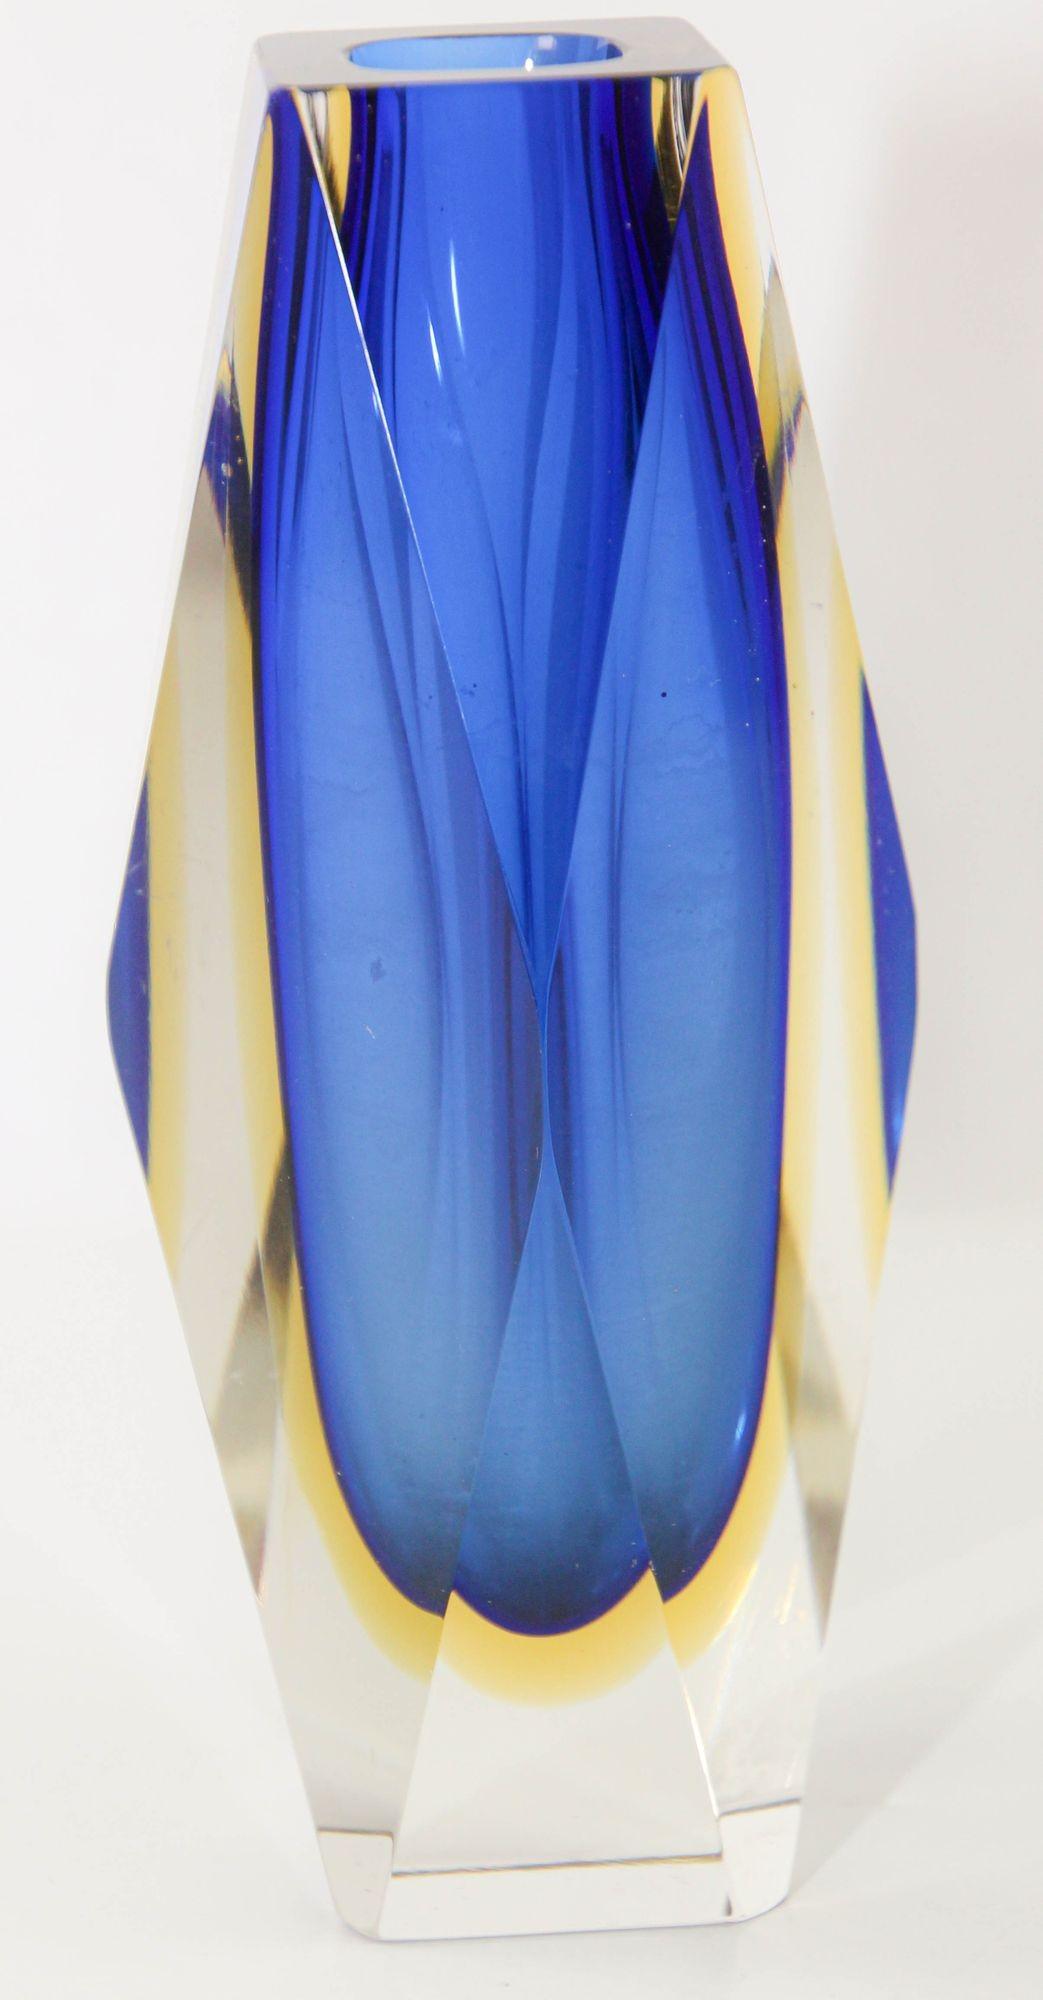 Mid-Century Modern Alessandro Mandruzzato Blue and Yellow Sommerso Murano Vase, Italy 1960s For Sale